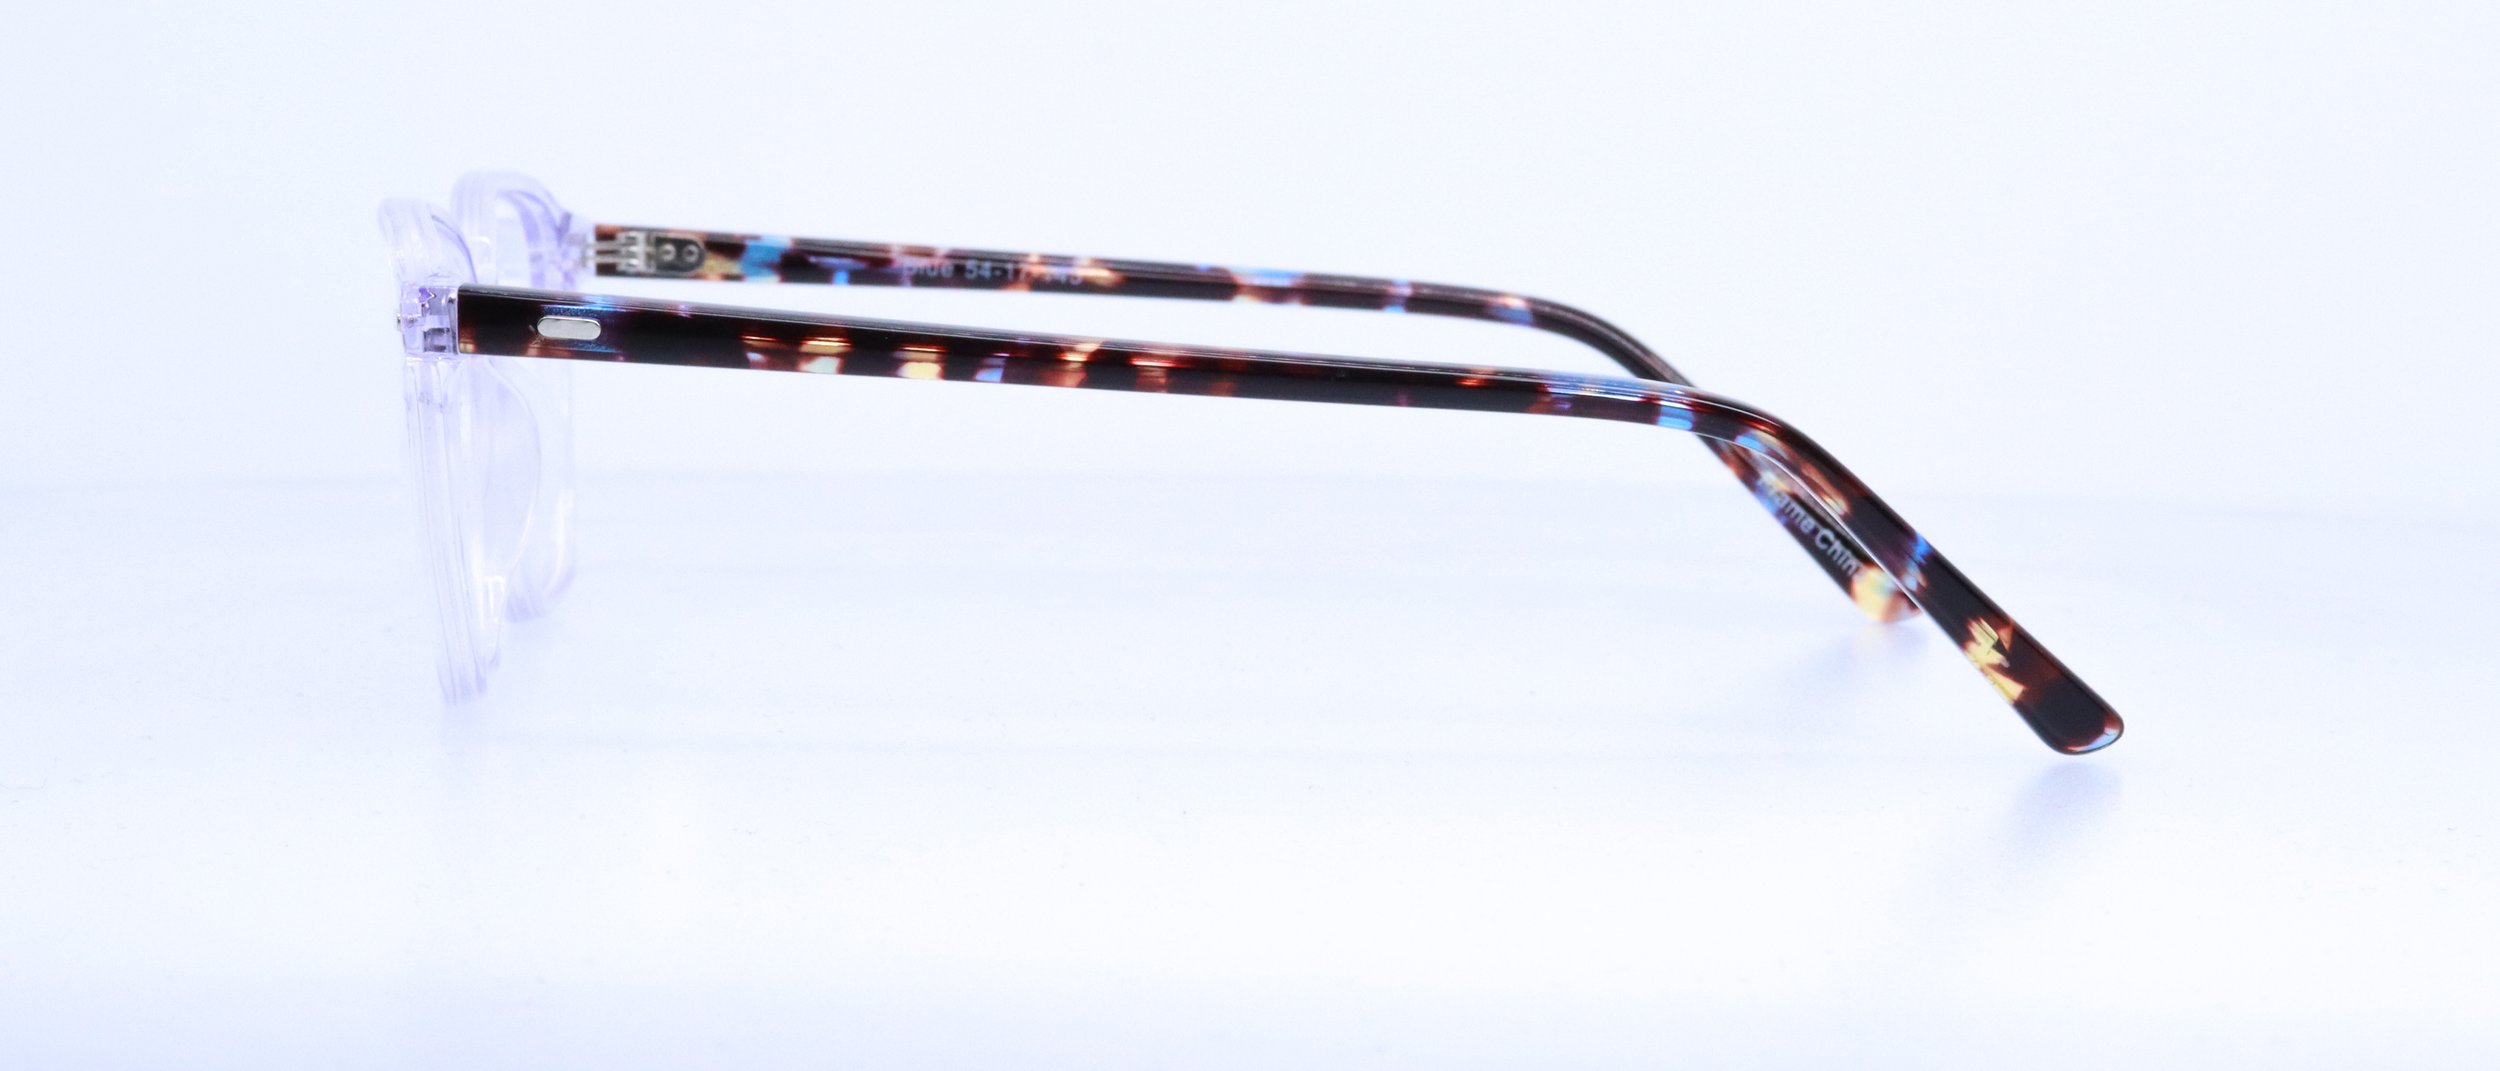  NEW!!! EV404: 54-17-145, Available in Blue Clear/Tortoise or Pink/Tortoise 